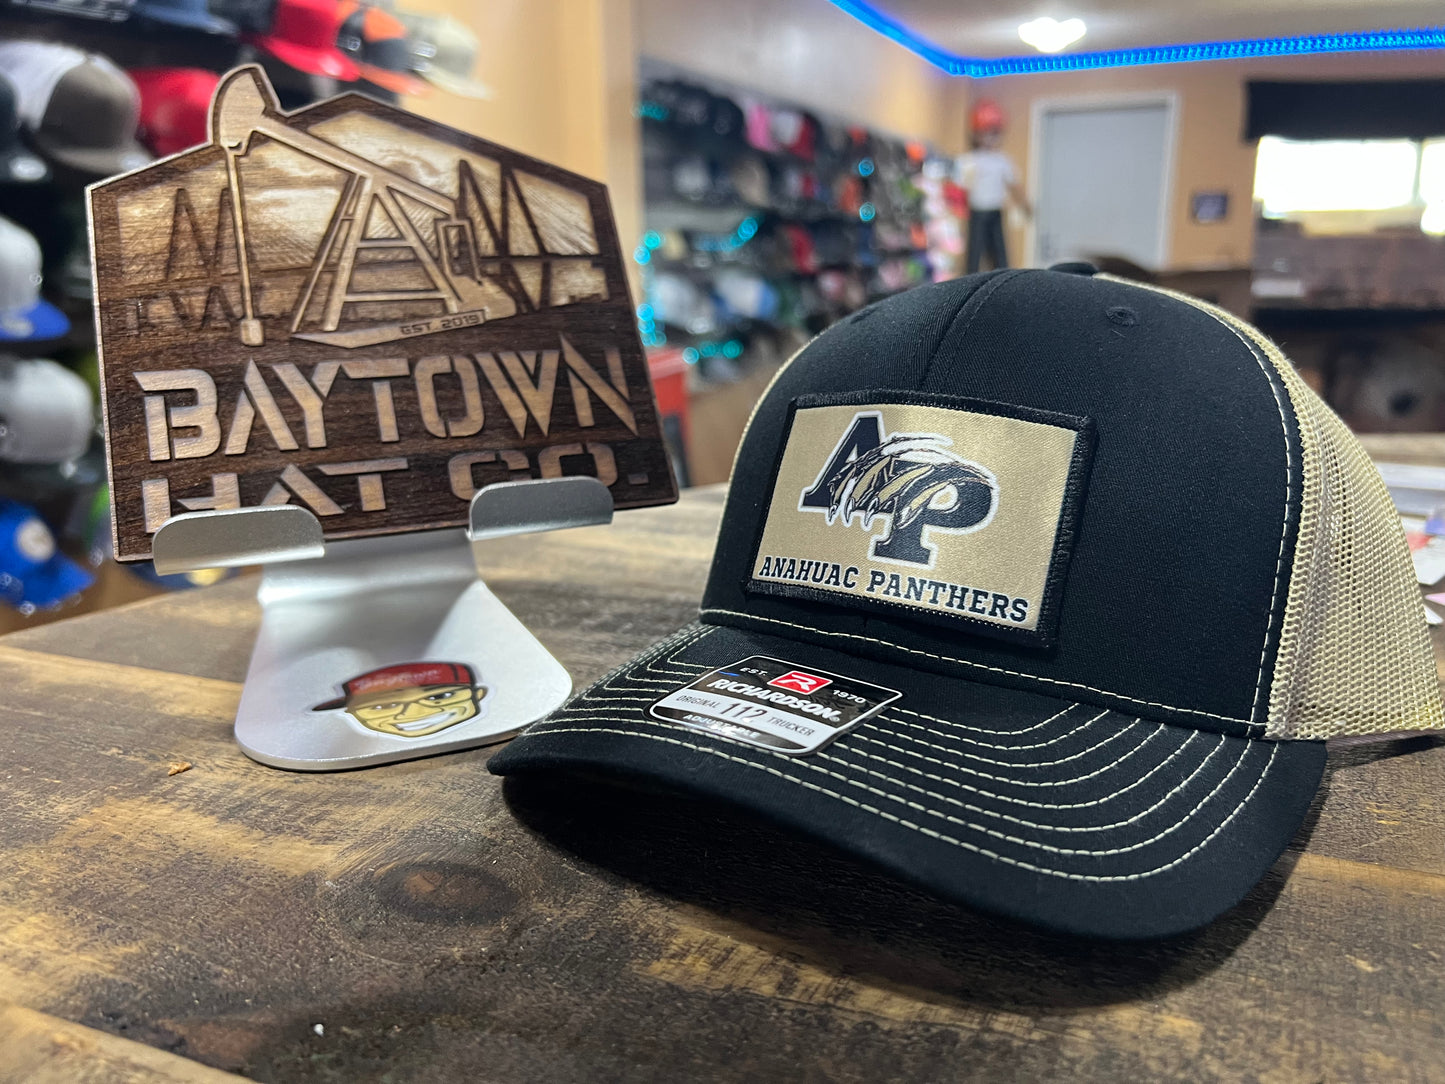 Anahuac Panthers – Baytown Hat Co.